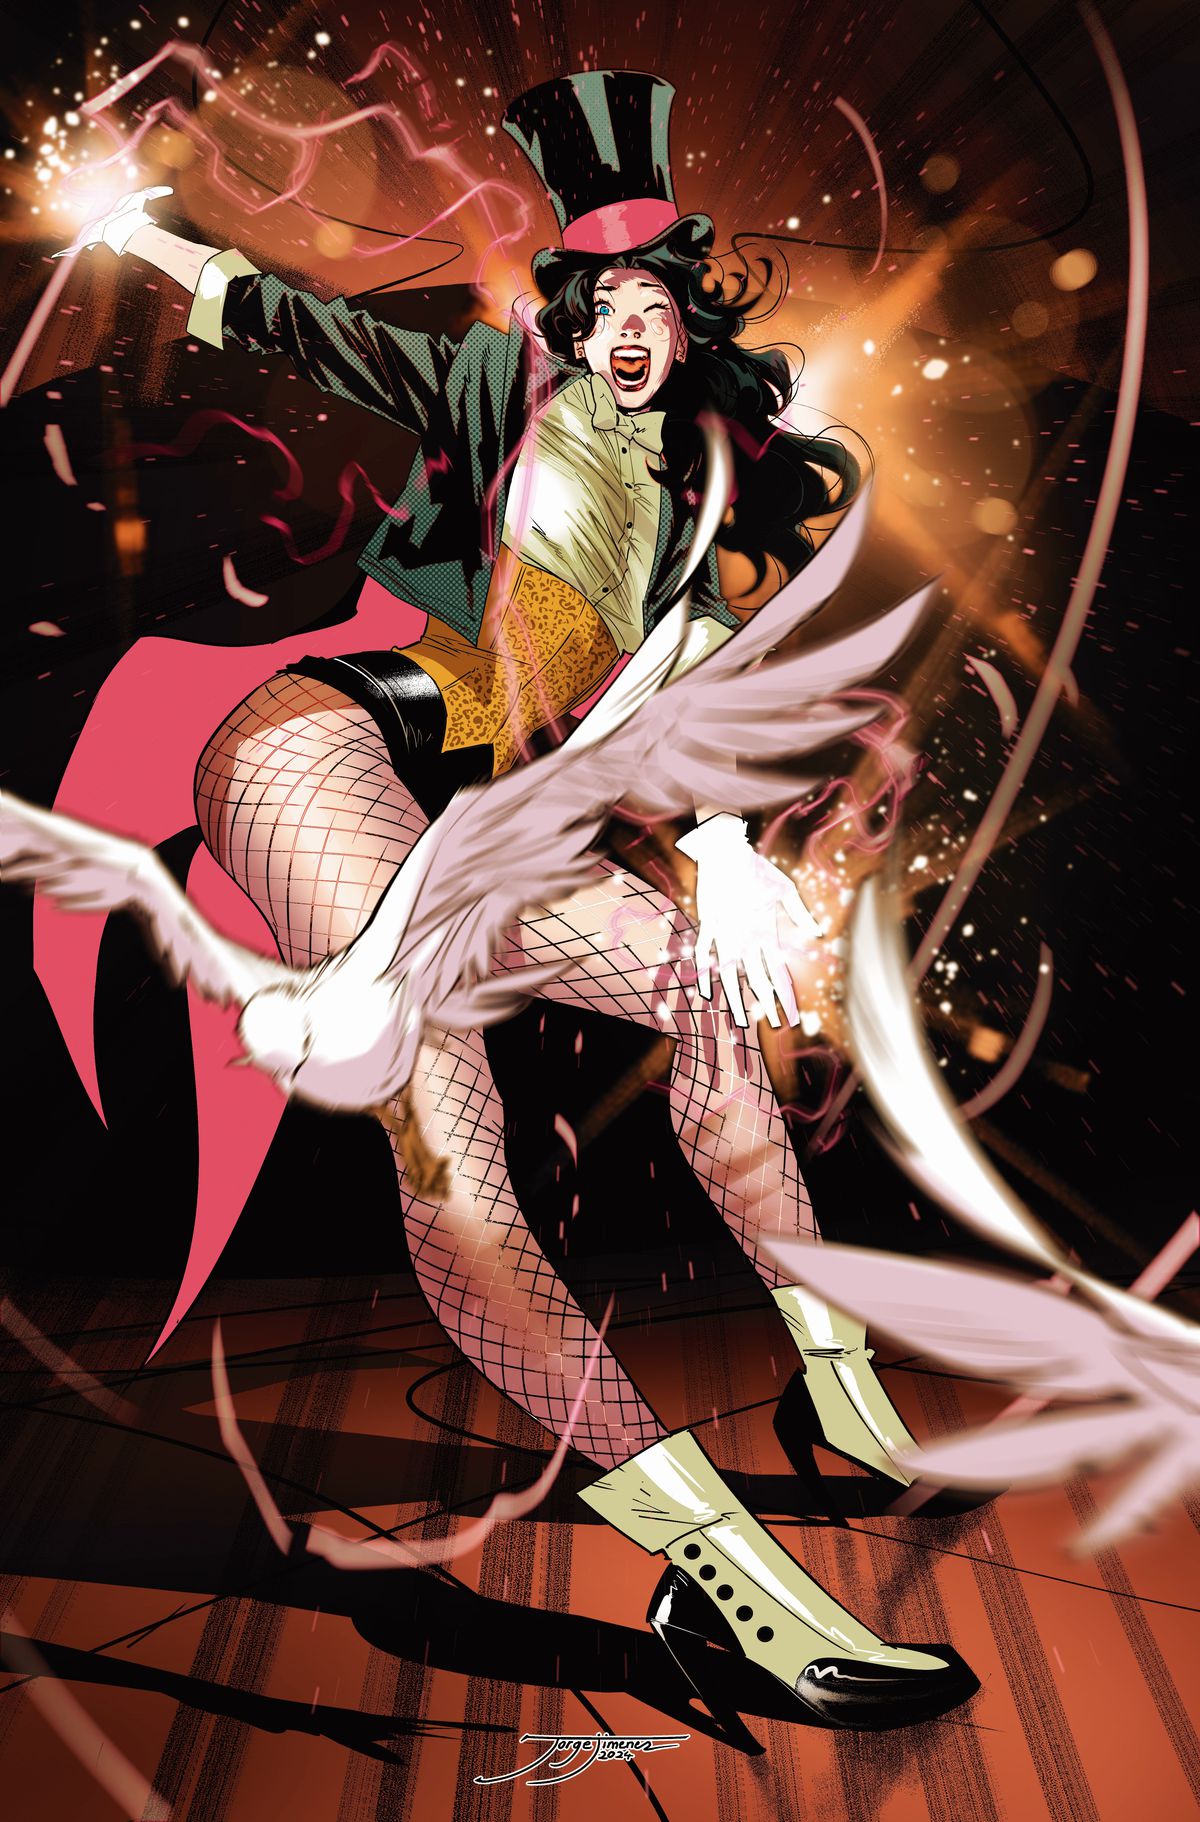 Zatanna poses dynamically, bright magic sparkles streaking from her hands, white doves flying away from her.